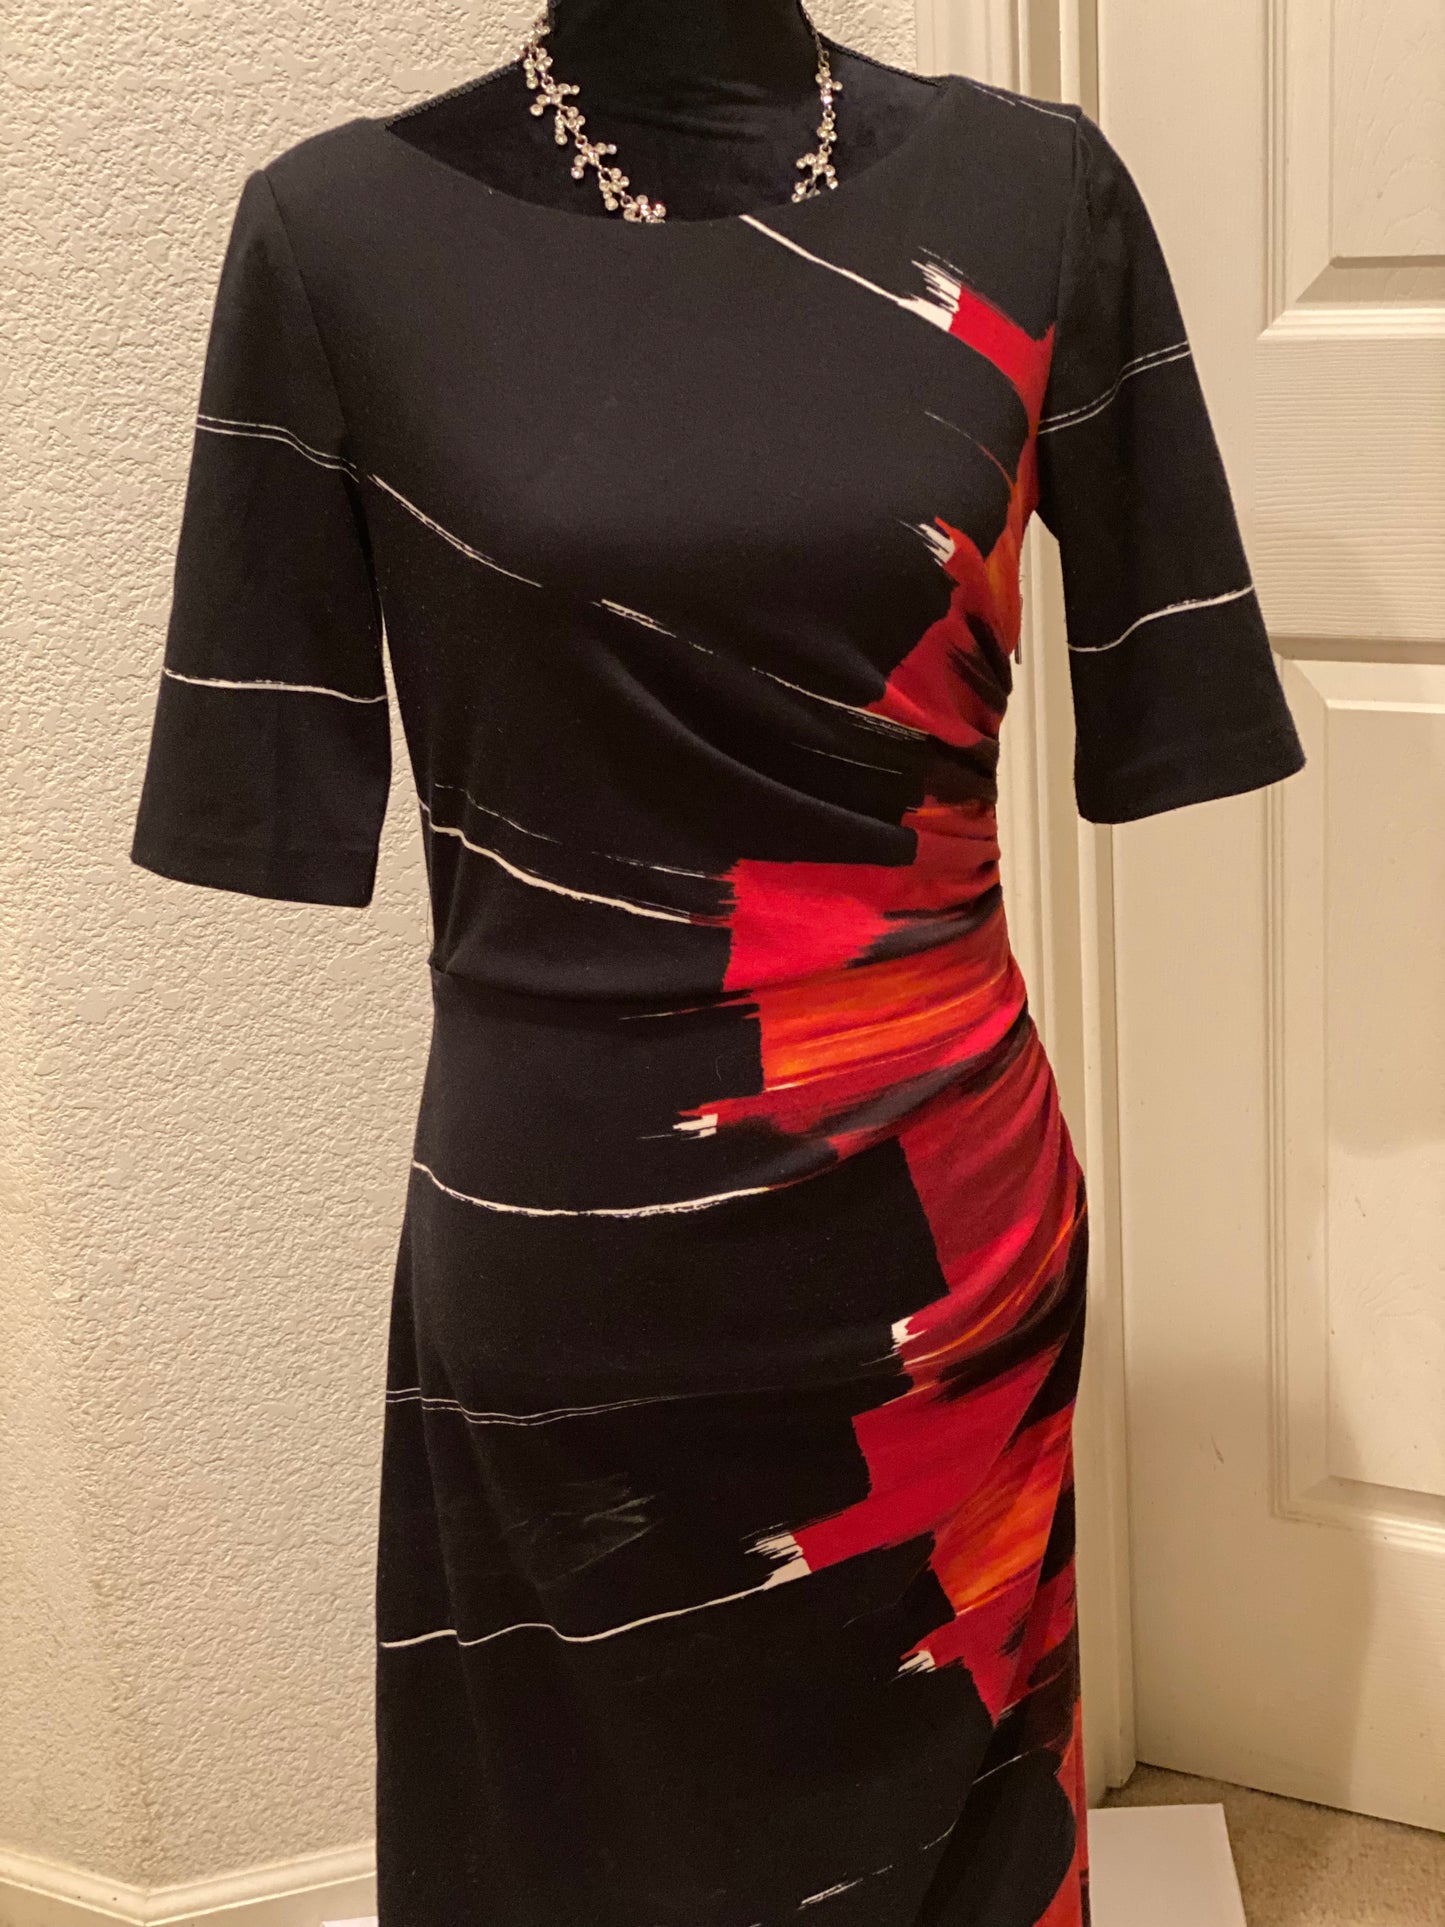 Maggy London Dress, US Size 8